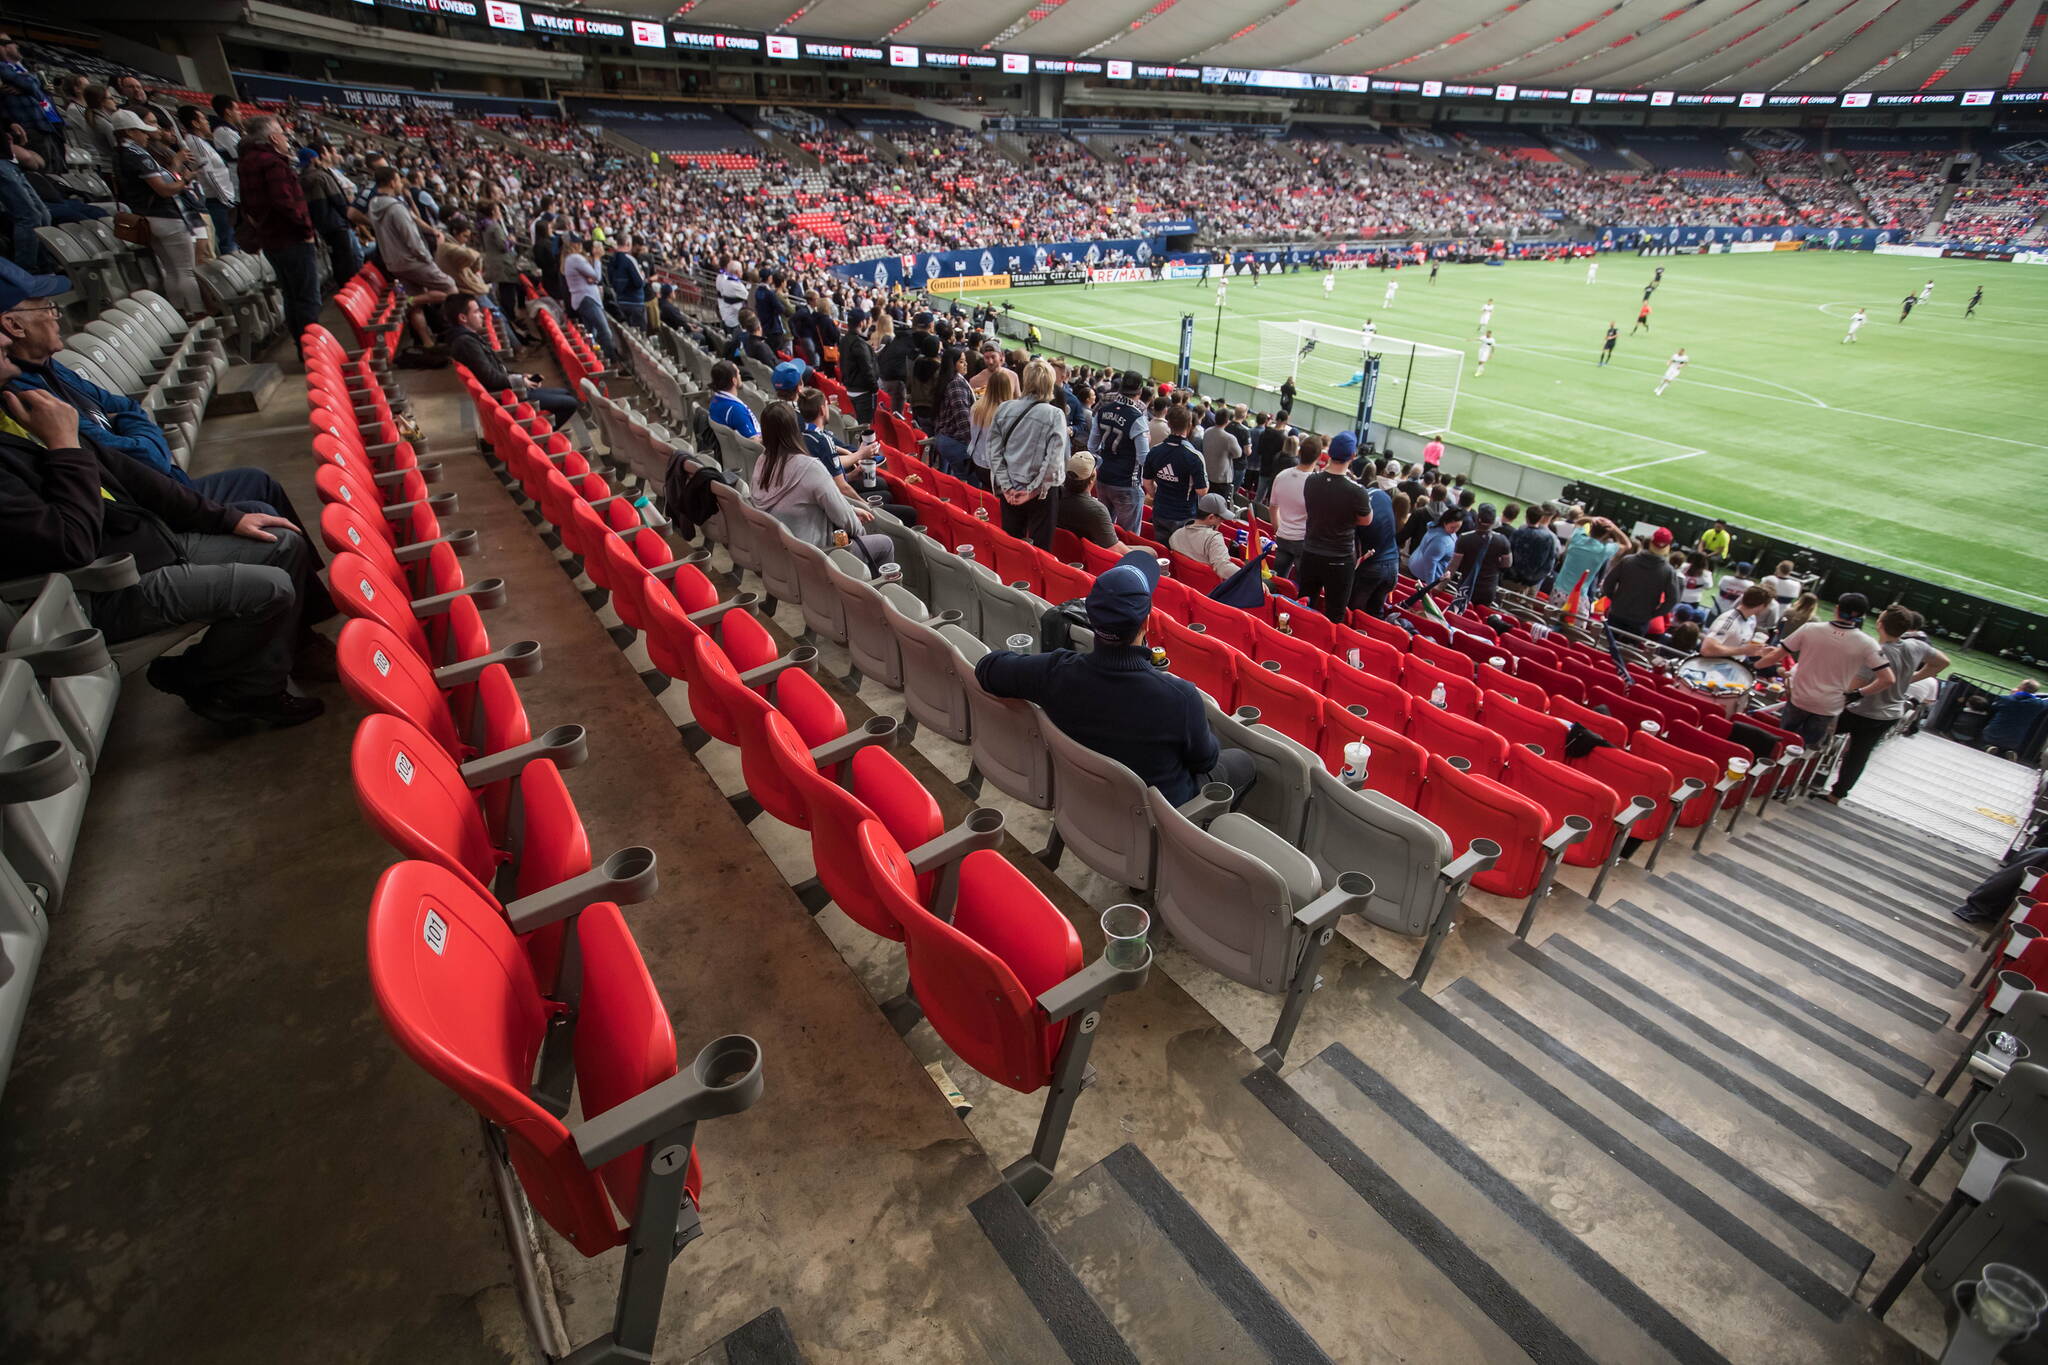 Numerous seats sit empty after Vancouver Whitecaps fans left their seats during an in-game walkout protest to show support for members of the 2008 women’s Whitecaps and under-20 Canadian national team who have alleged abuse by a former coach who ran both teams, as the Whitecaps play the Philadelphia Union during the first half of an MLS soccer match in Vancouver, on Saturday April 27, 2019. THE CANADIAN PRESS/Darryl Dyck